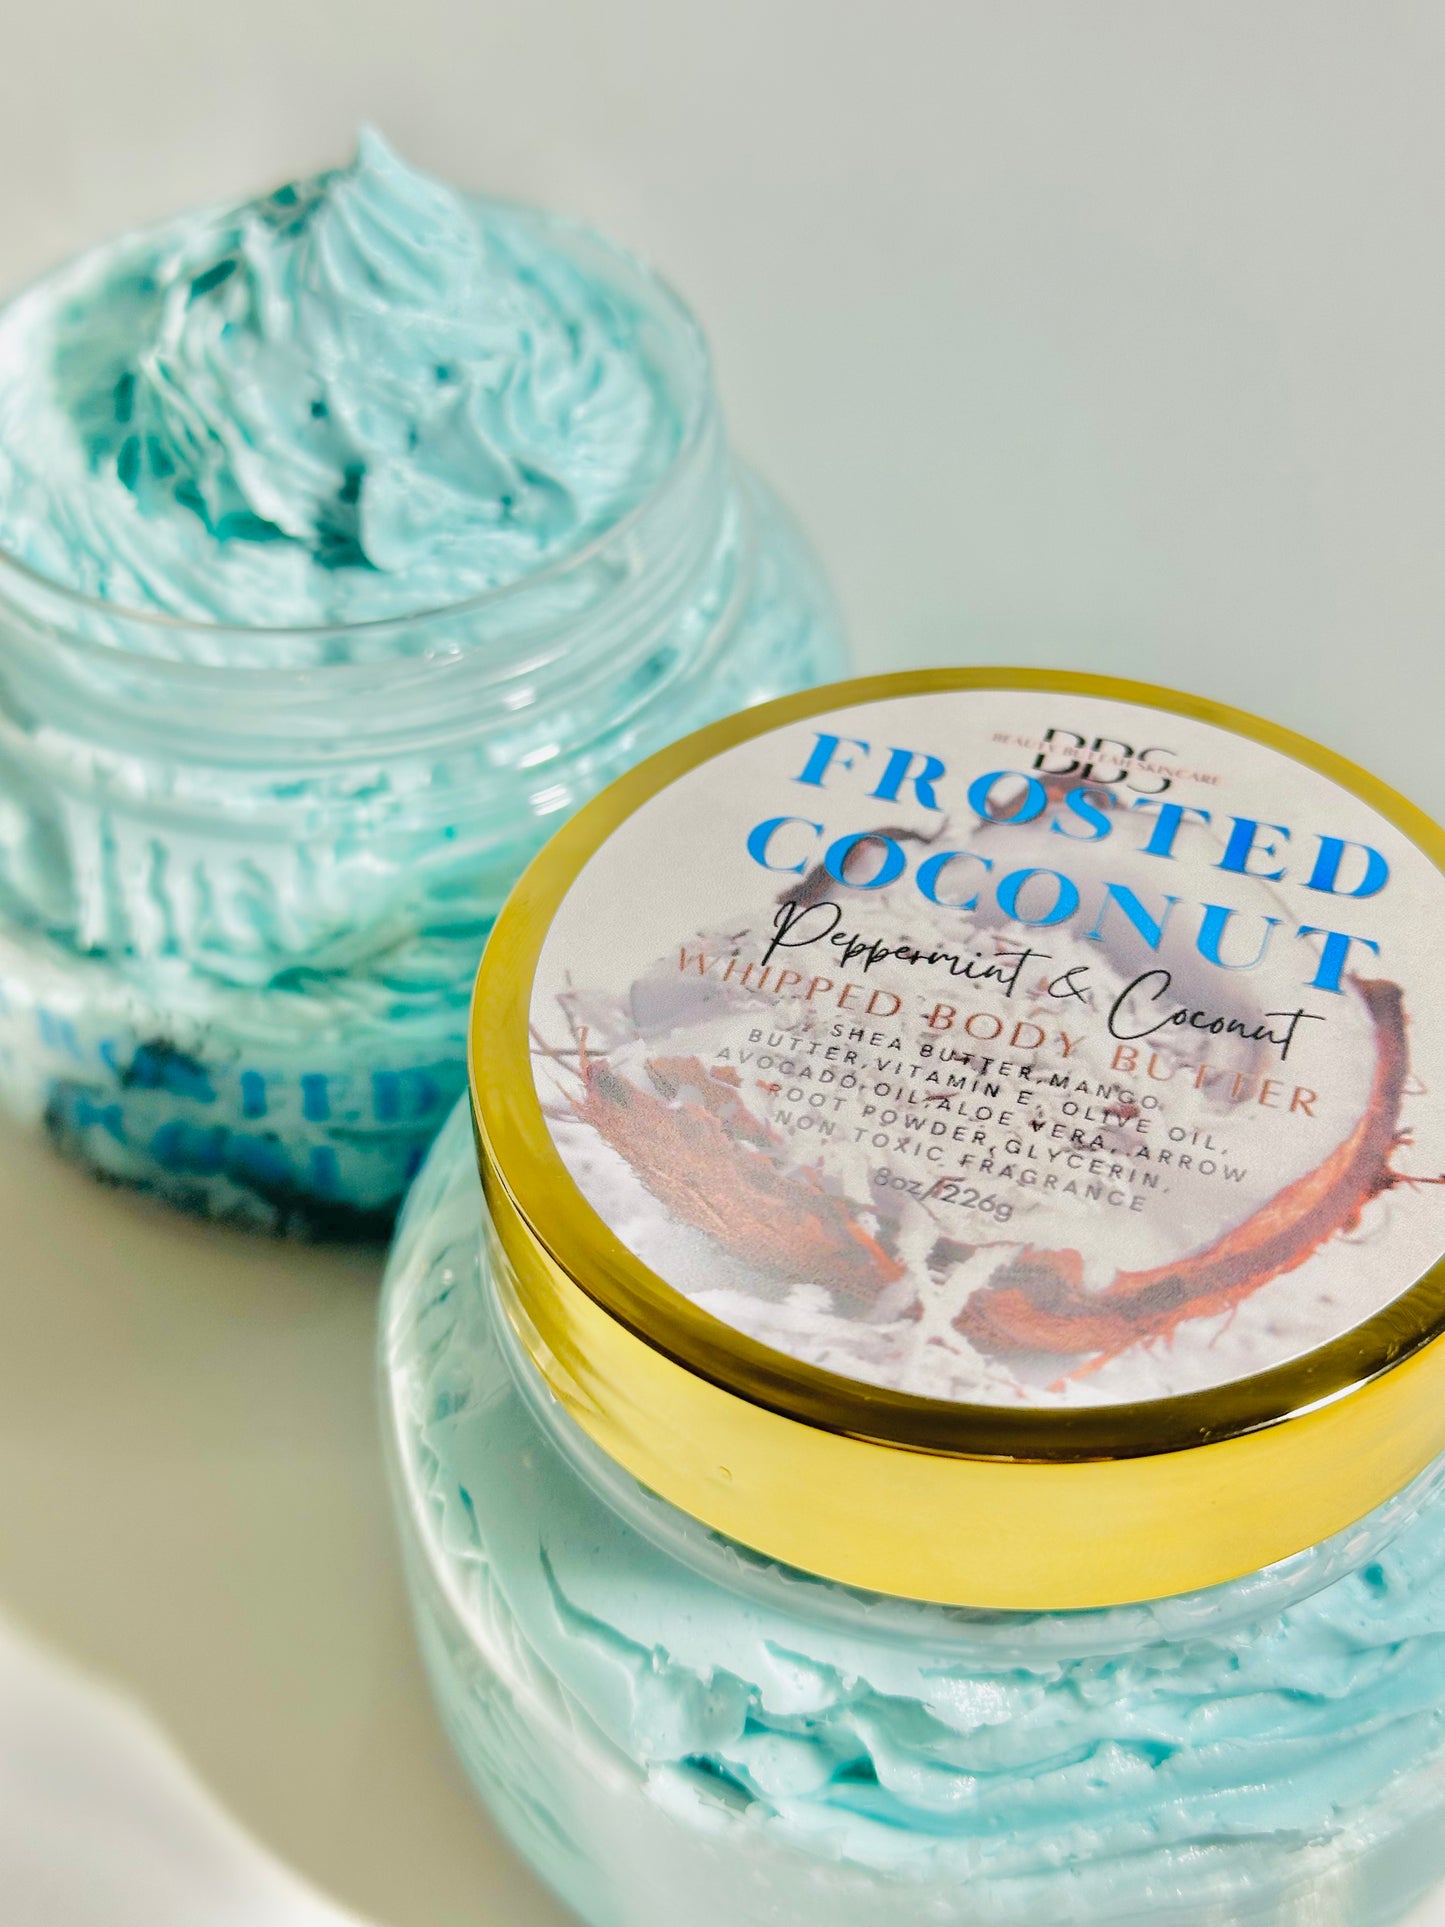 FROSTED COCONUT WHIPPED BODY BUTTER